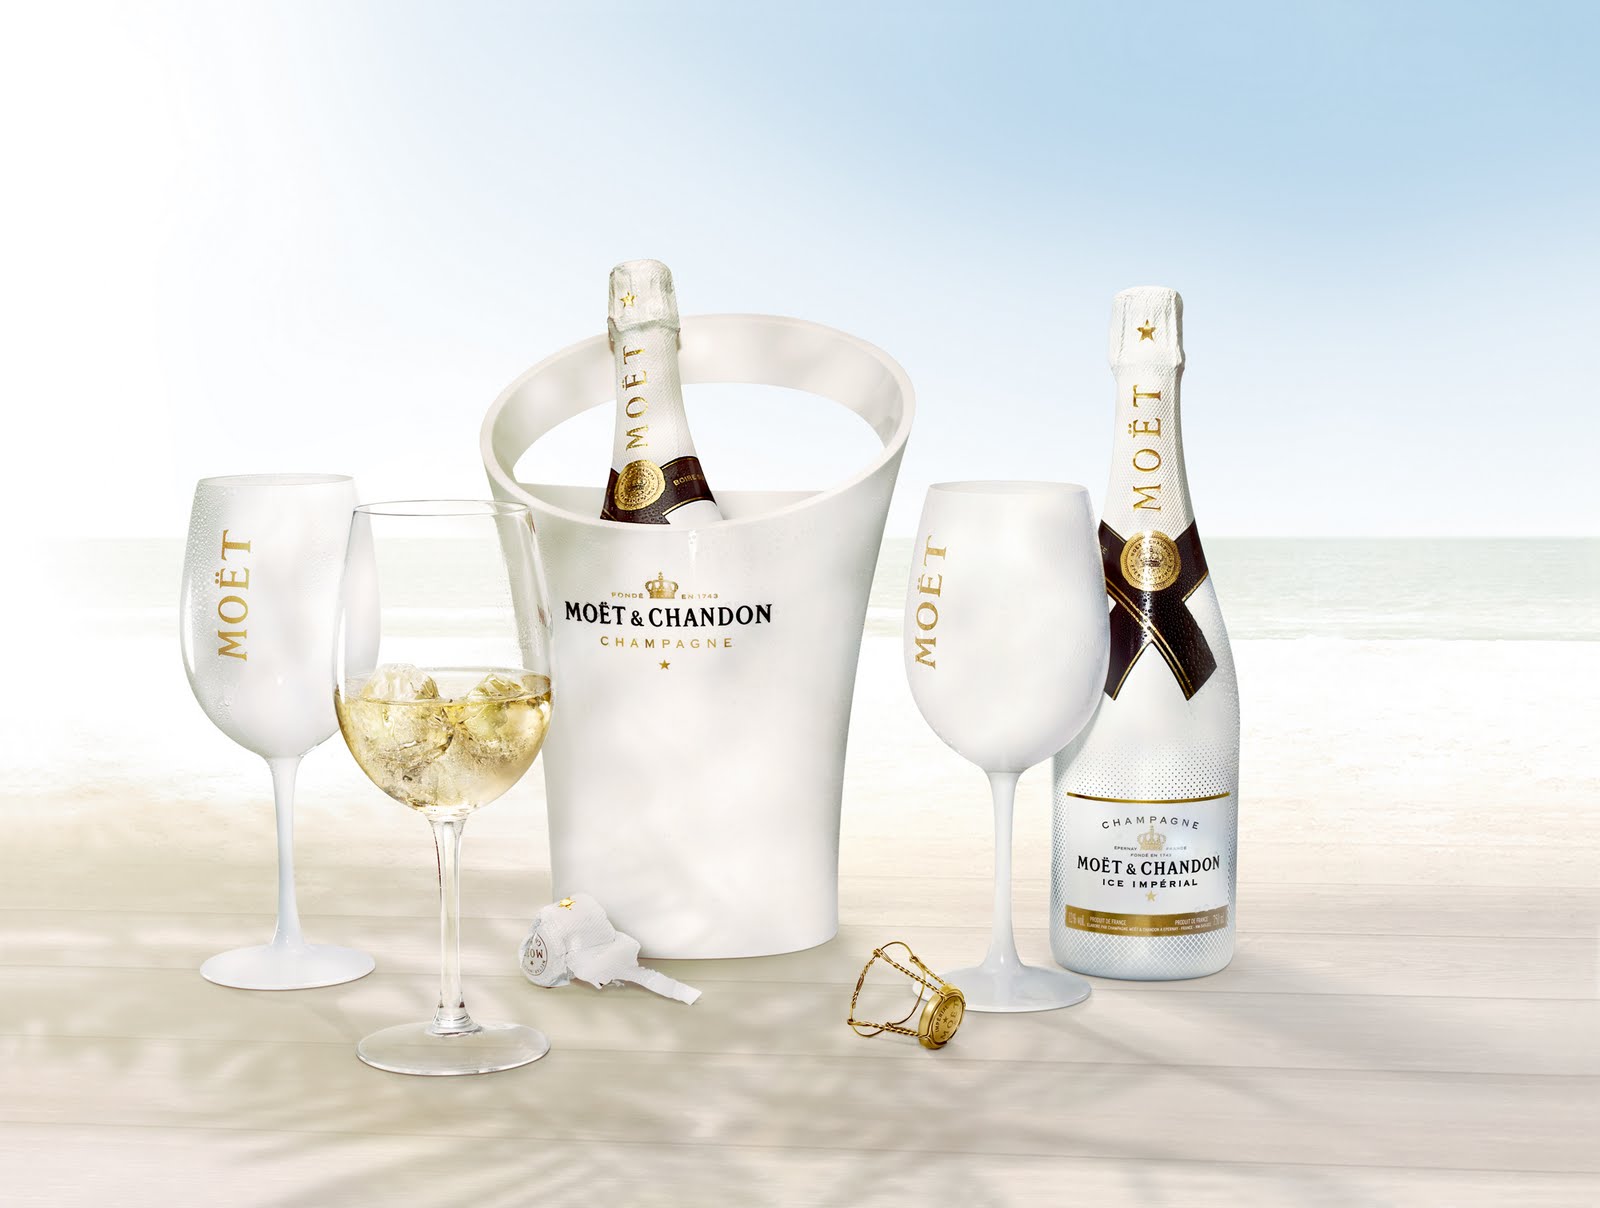 Moet Ice Imperial review